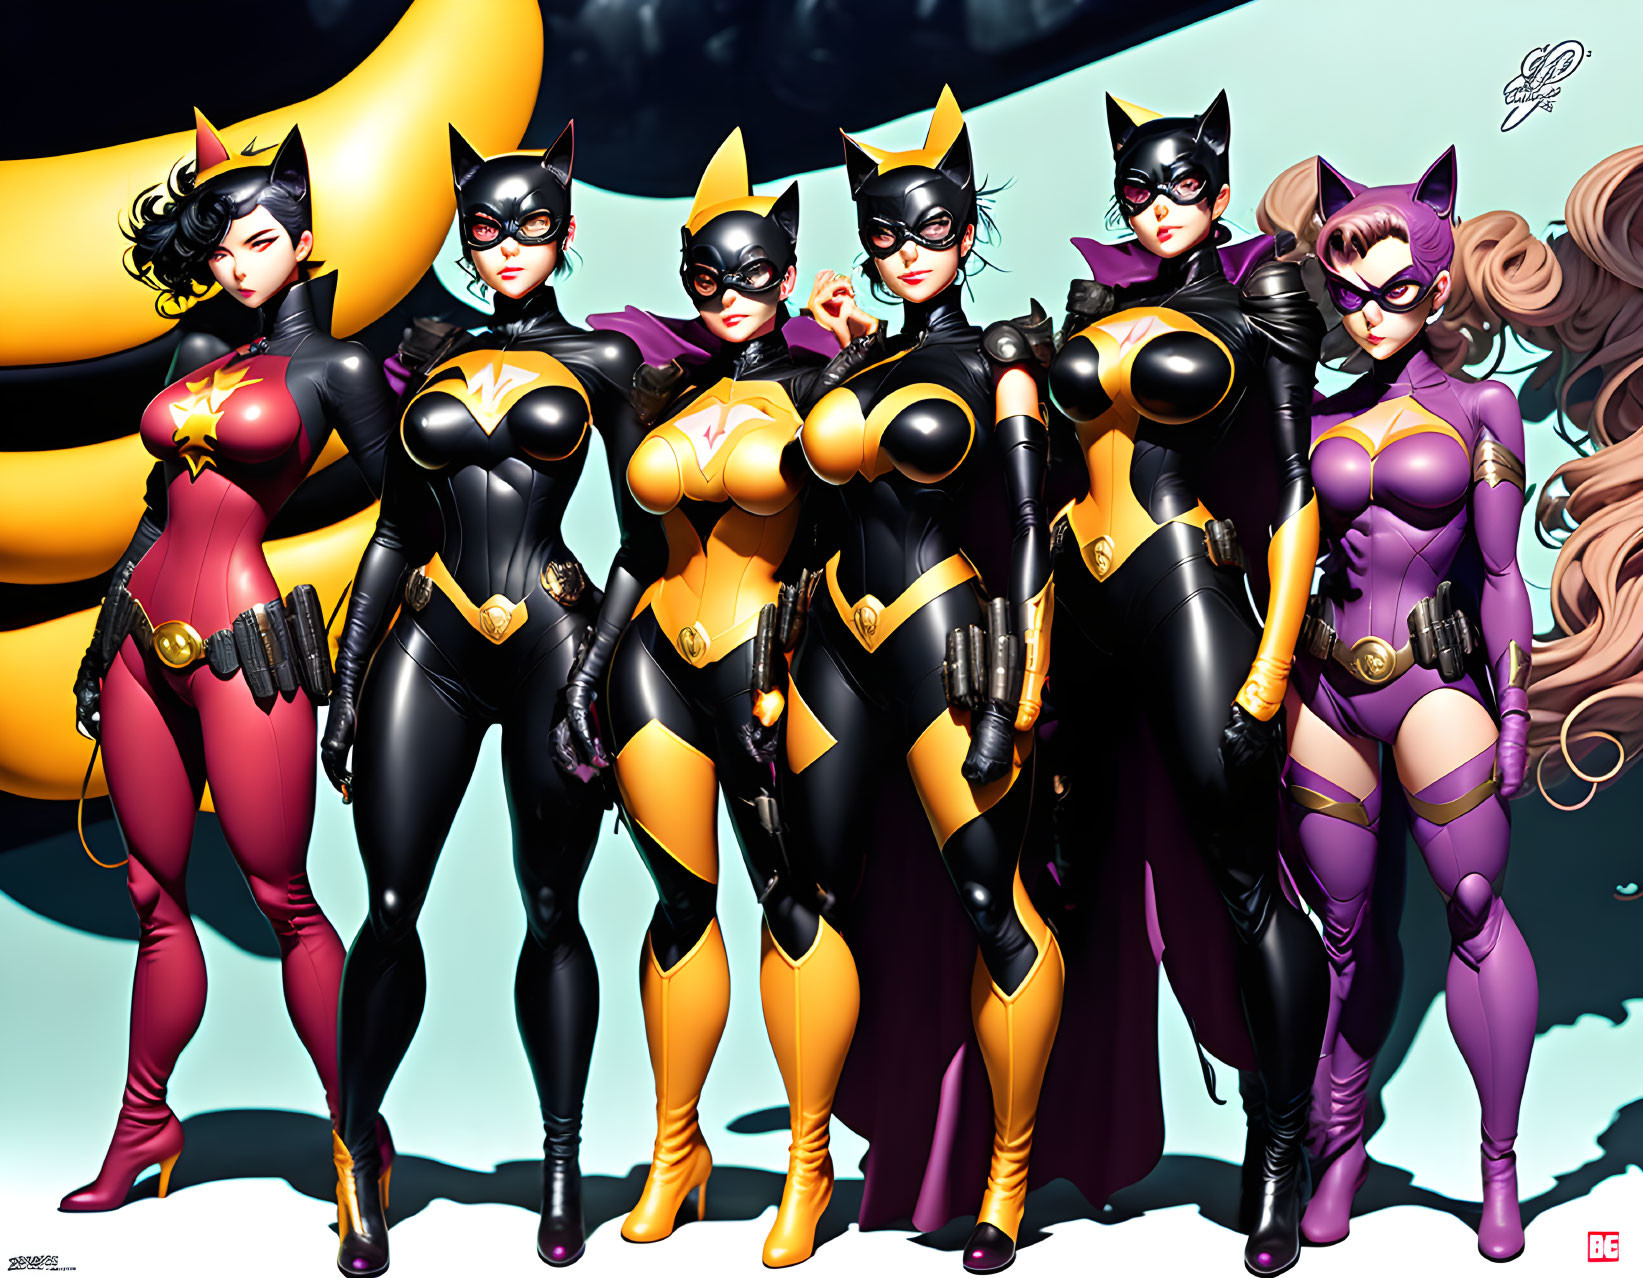 A Famous Anime Female Catwoman Team